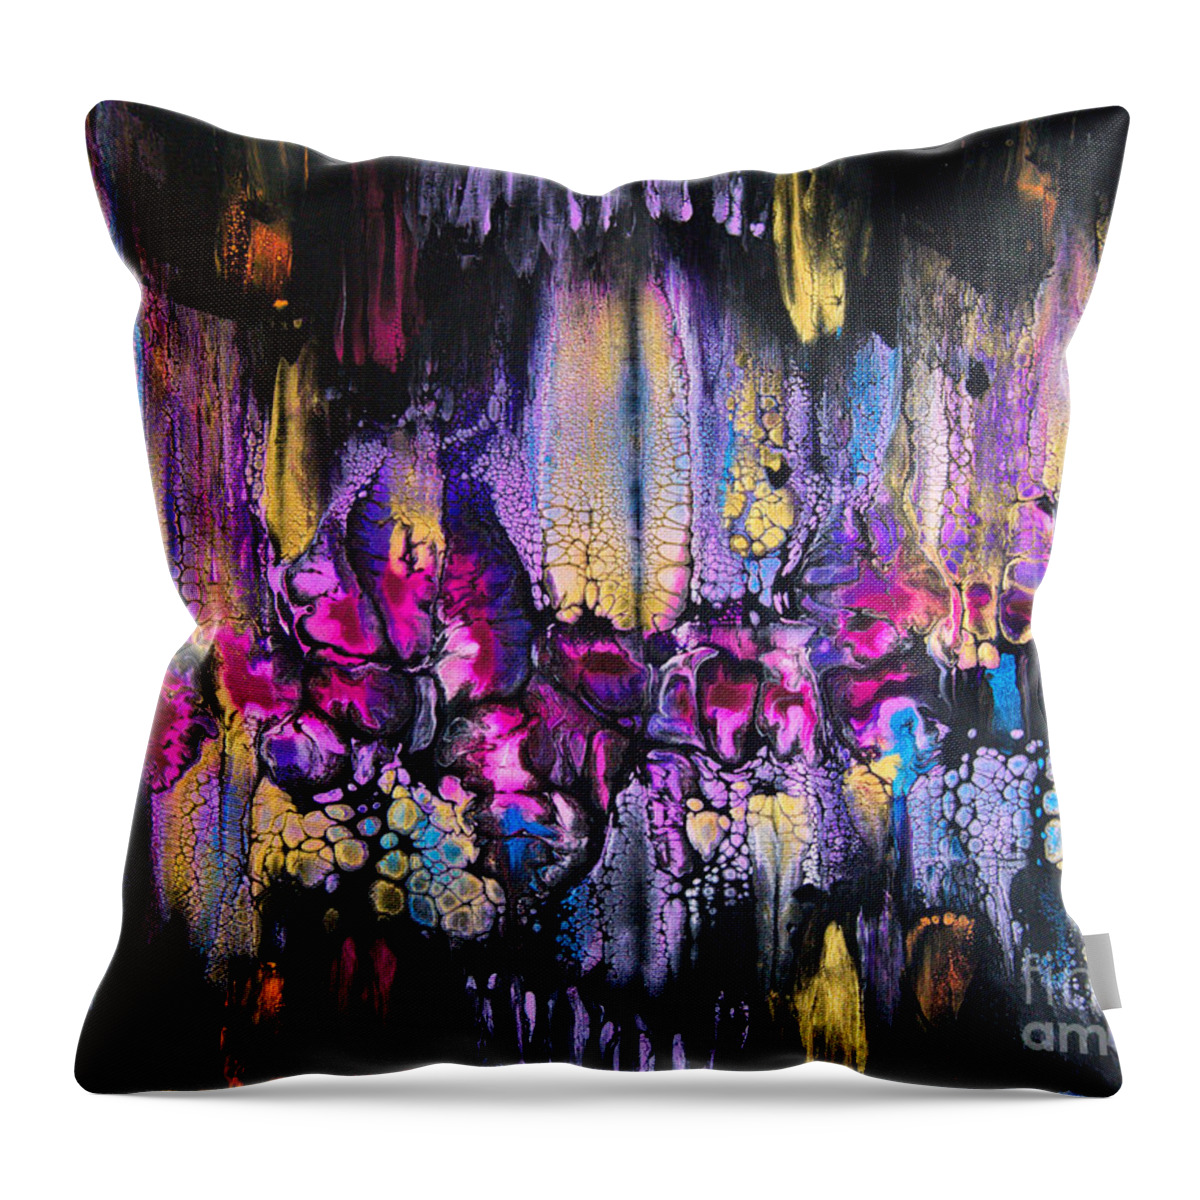 Abstract Expressionist Contemporary Modern Art Throw Pillow featuring the painting Exotic Lightshow 8027 by Priscilla Batzell Expressionist Art Studio Gallery